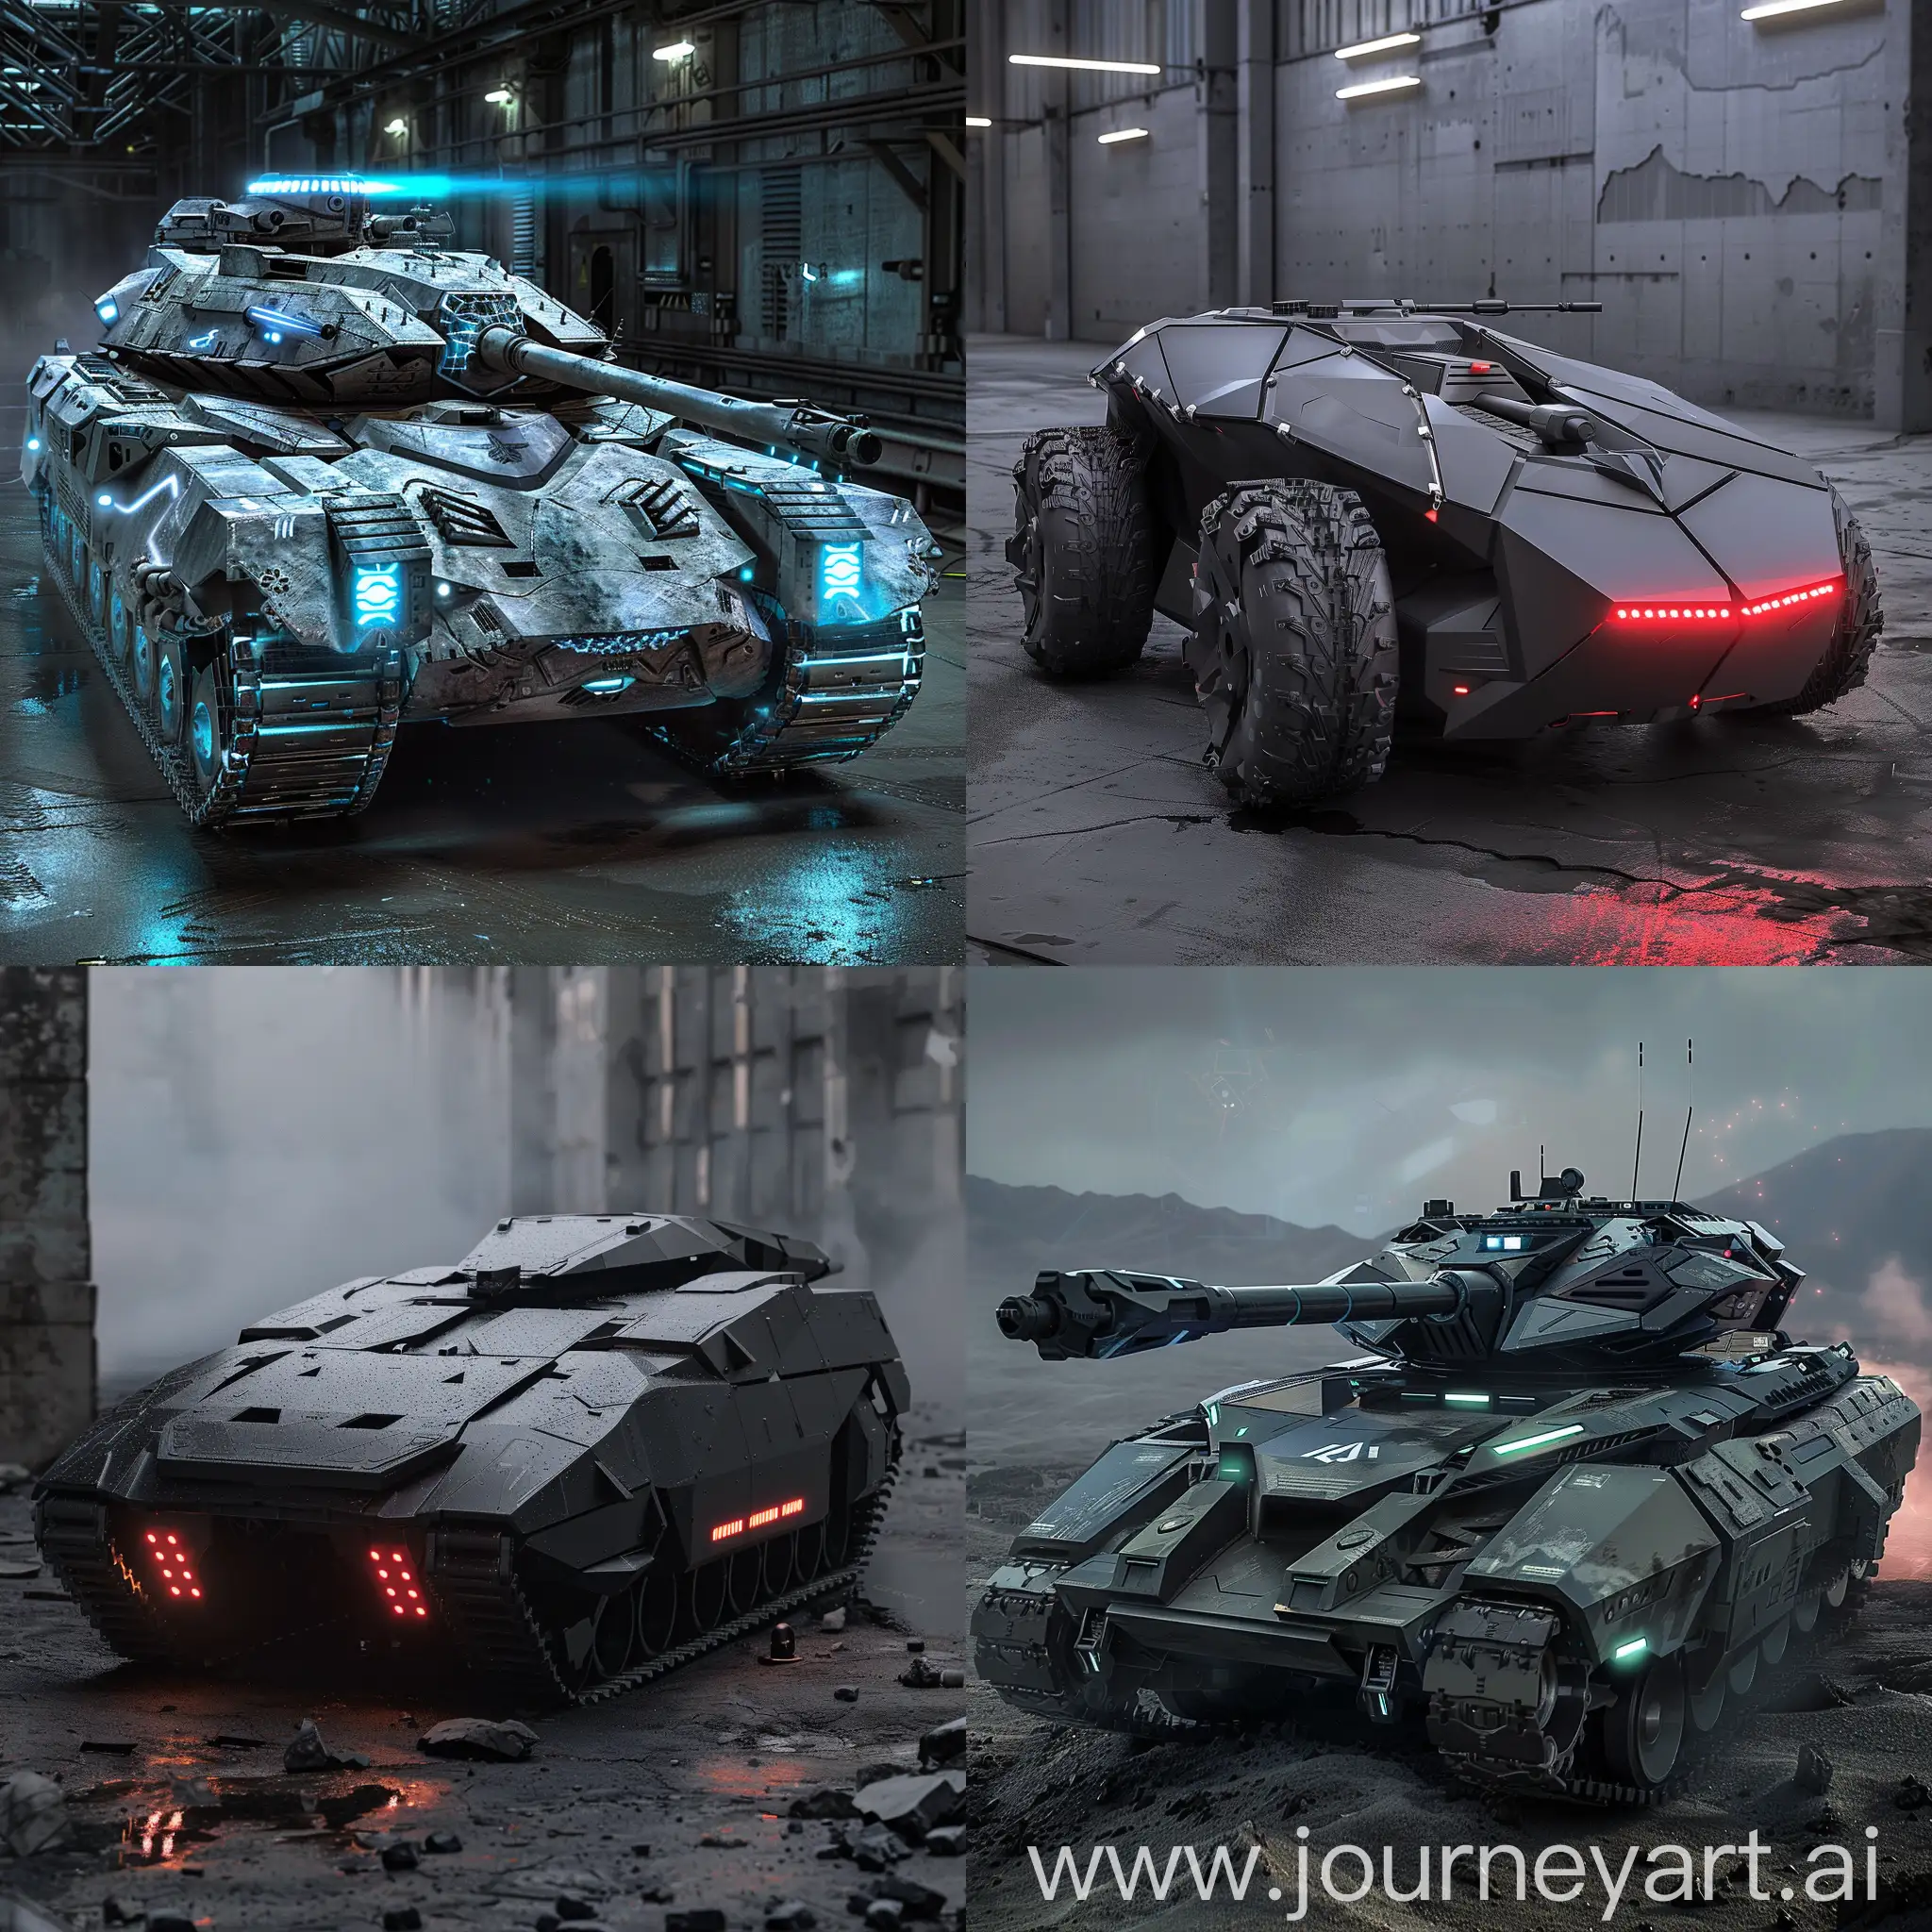 Advanced-Futuristic-Tank-with-Morphing-Reactive-Armor-and-QuantumShielded-Engine